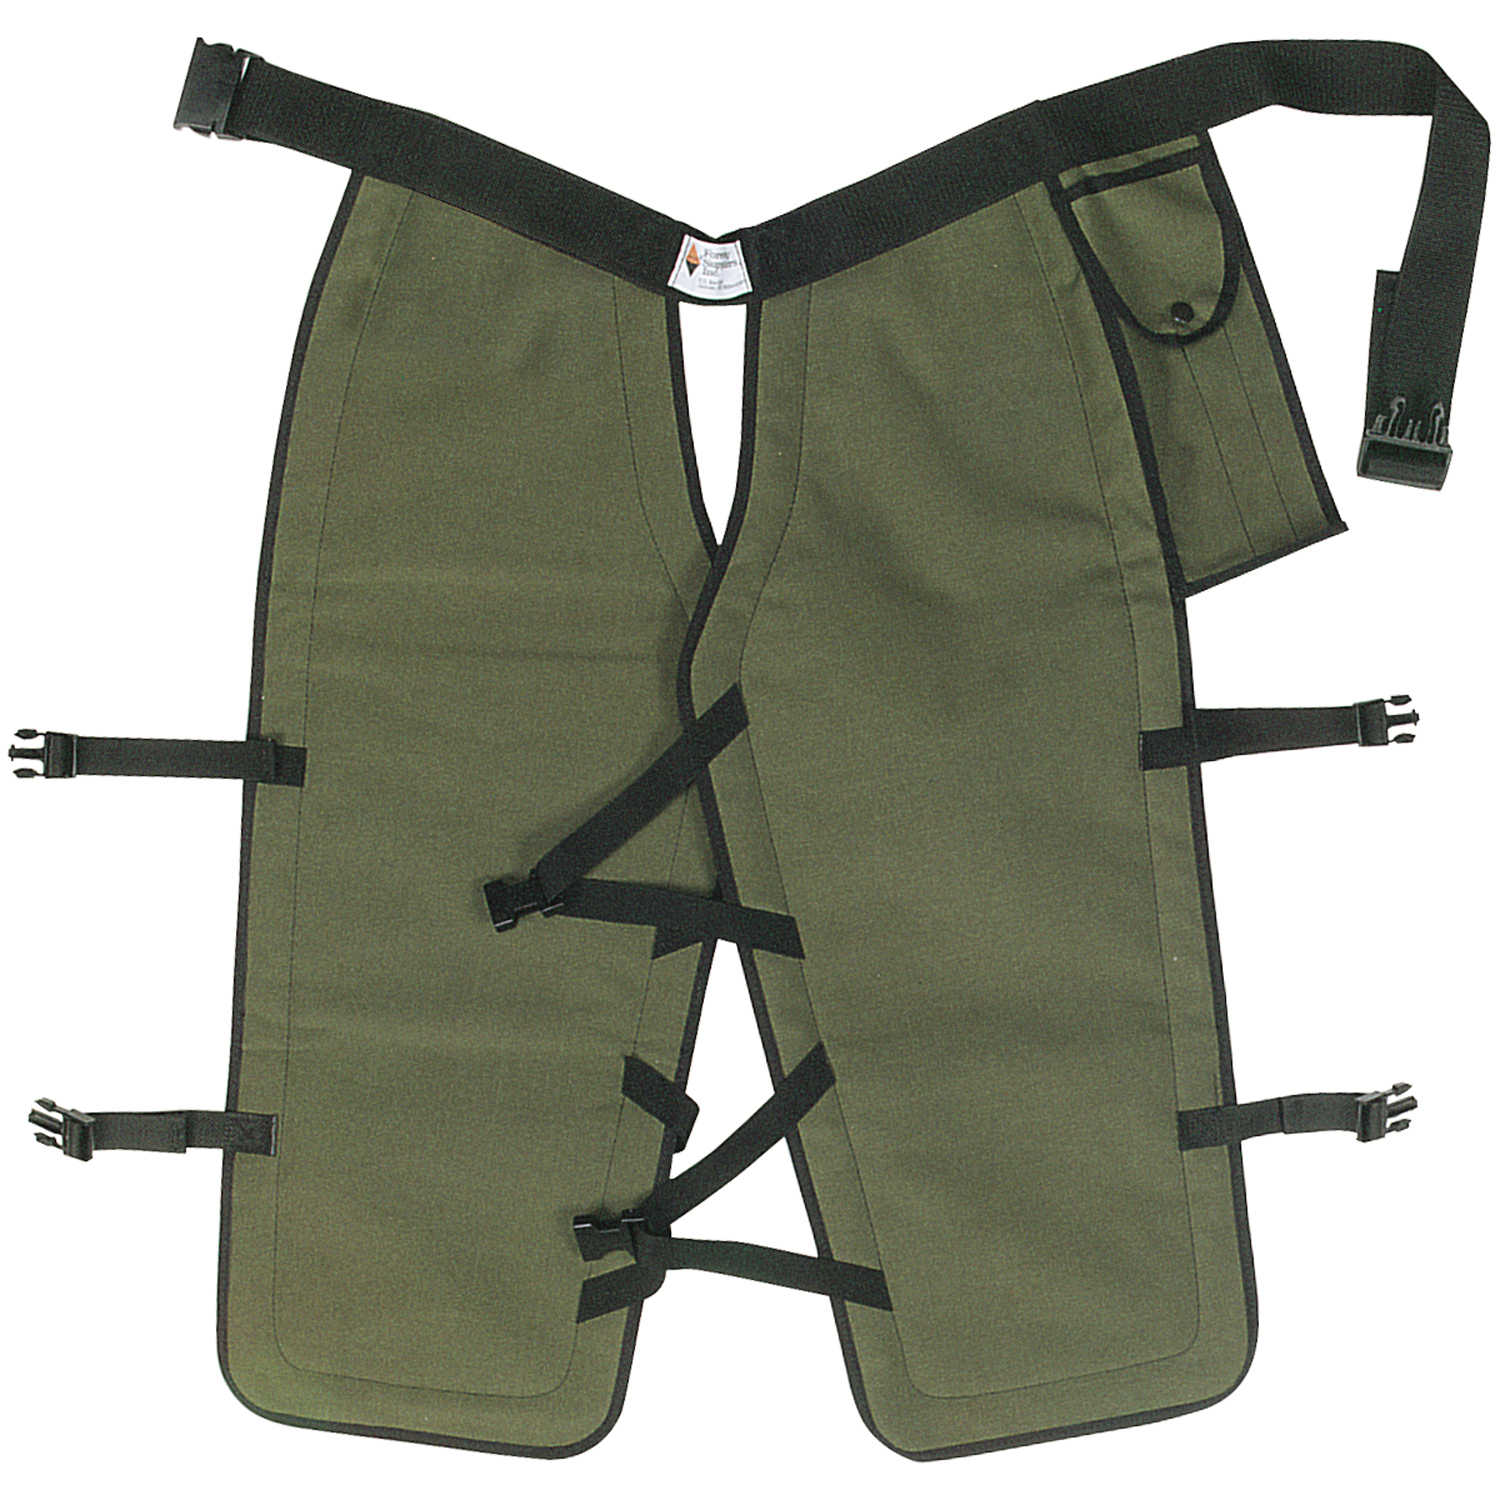 Chain Saw Chaps Four-Ply DuPont Kevlar, Green Non Compliant